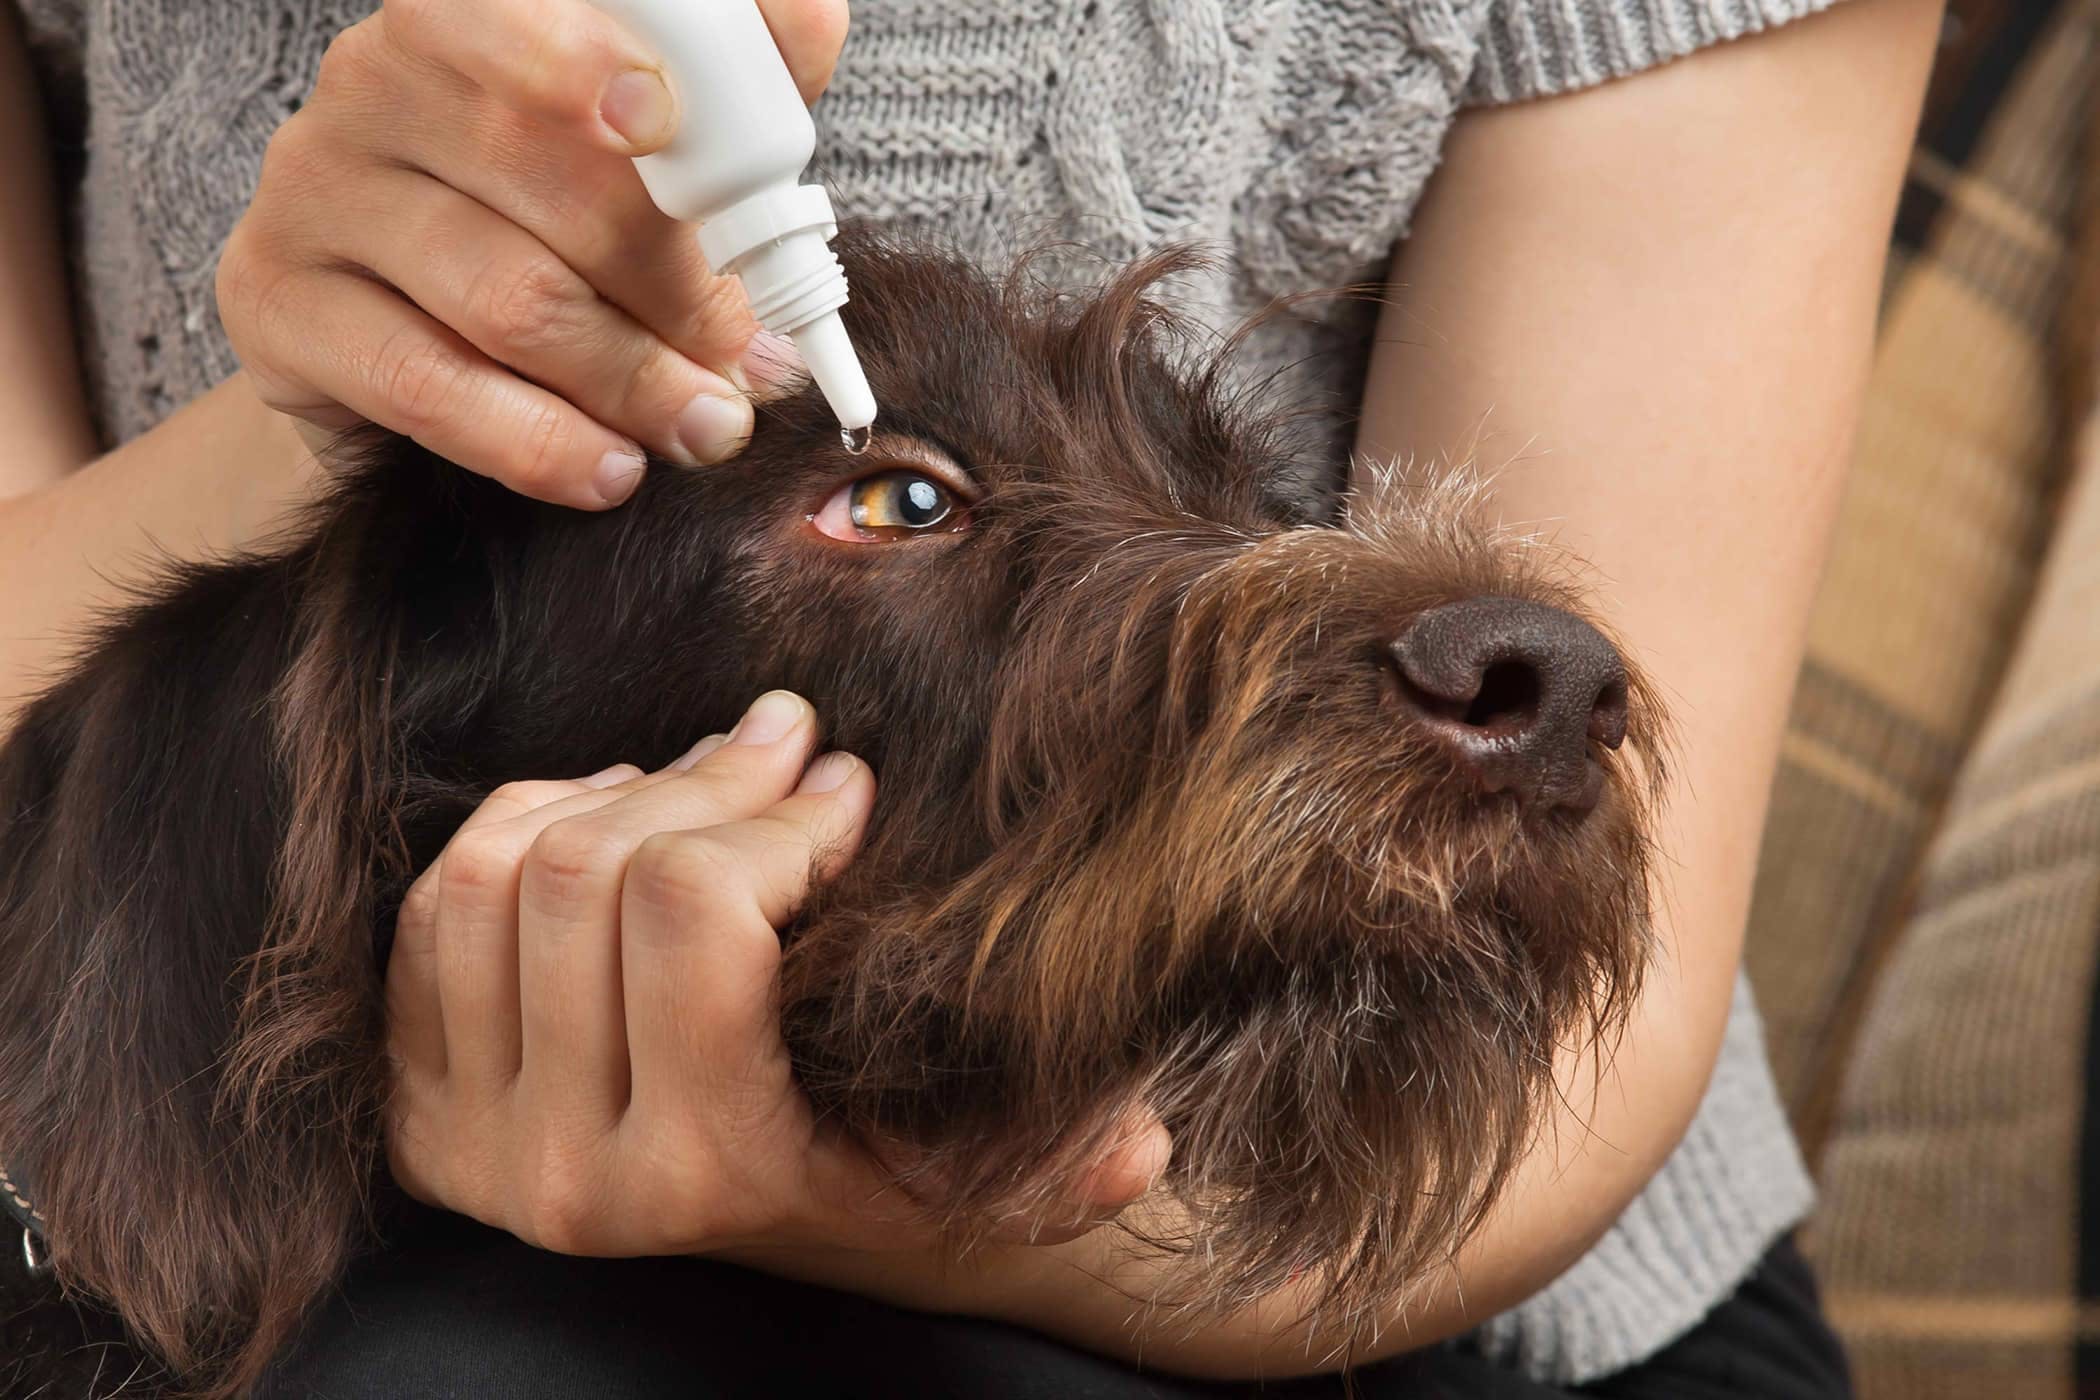 How can I treat my dogs eye infection at home?